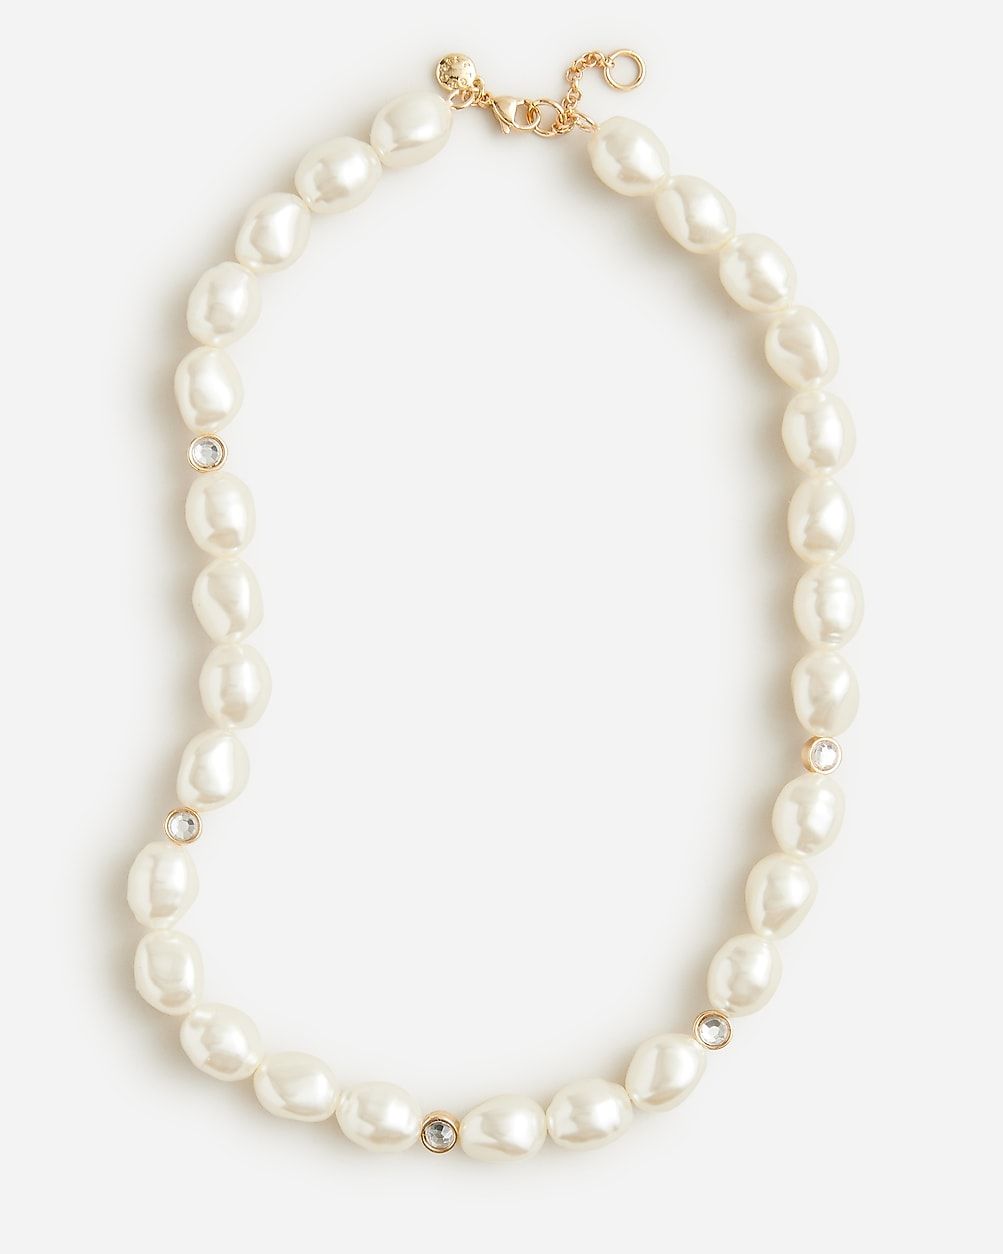 Girls' pearl and jewel necklace | J.Crew US